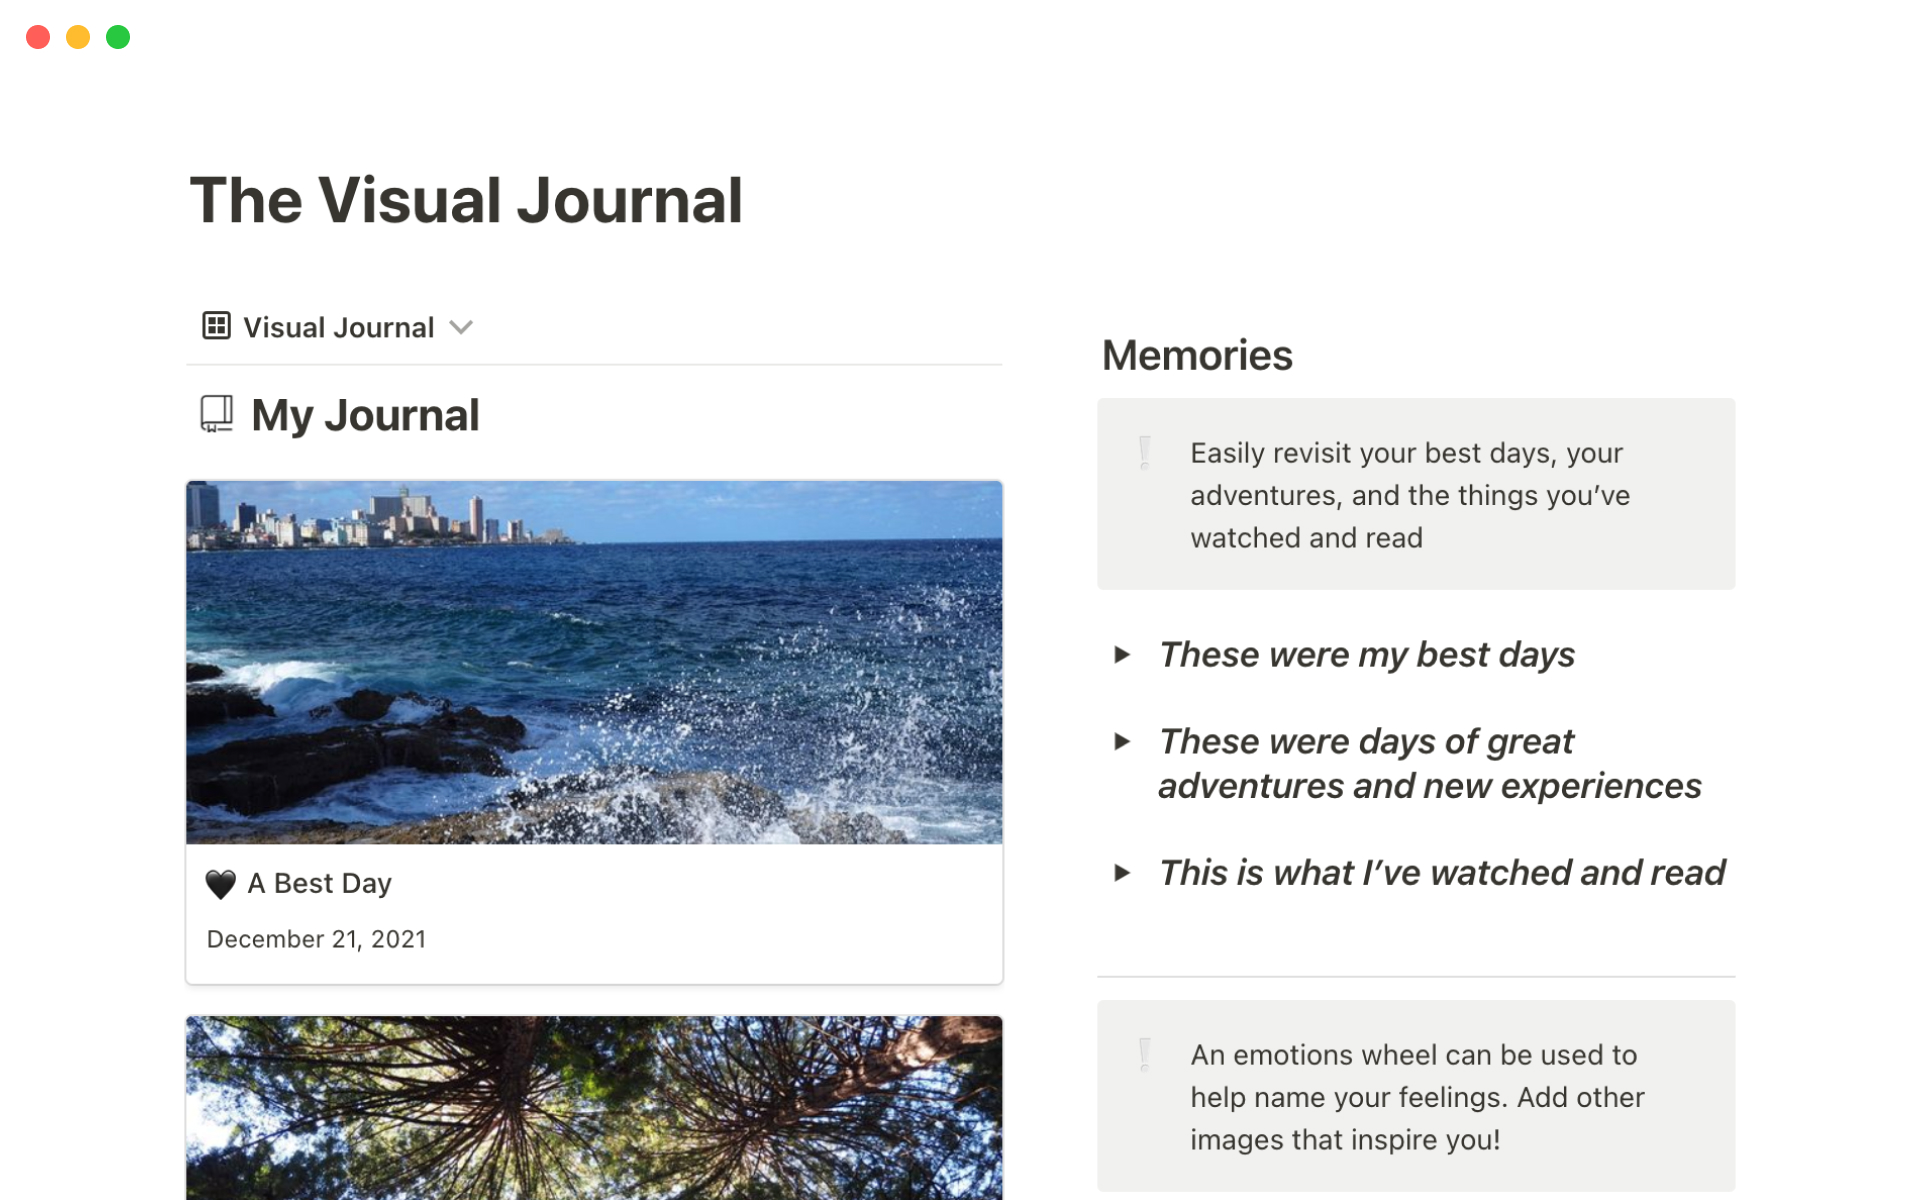 Start or improve your journaling practice with this full-featured dashboard and daily template.